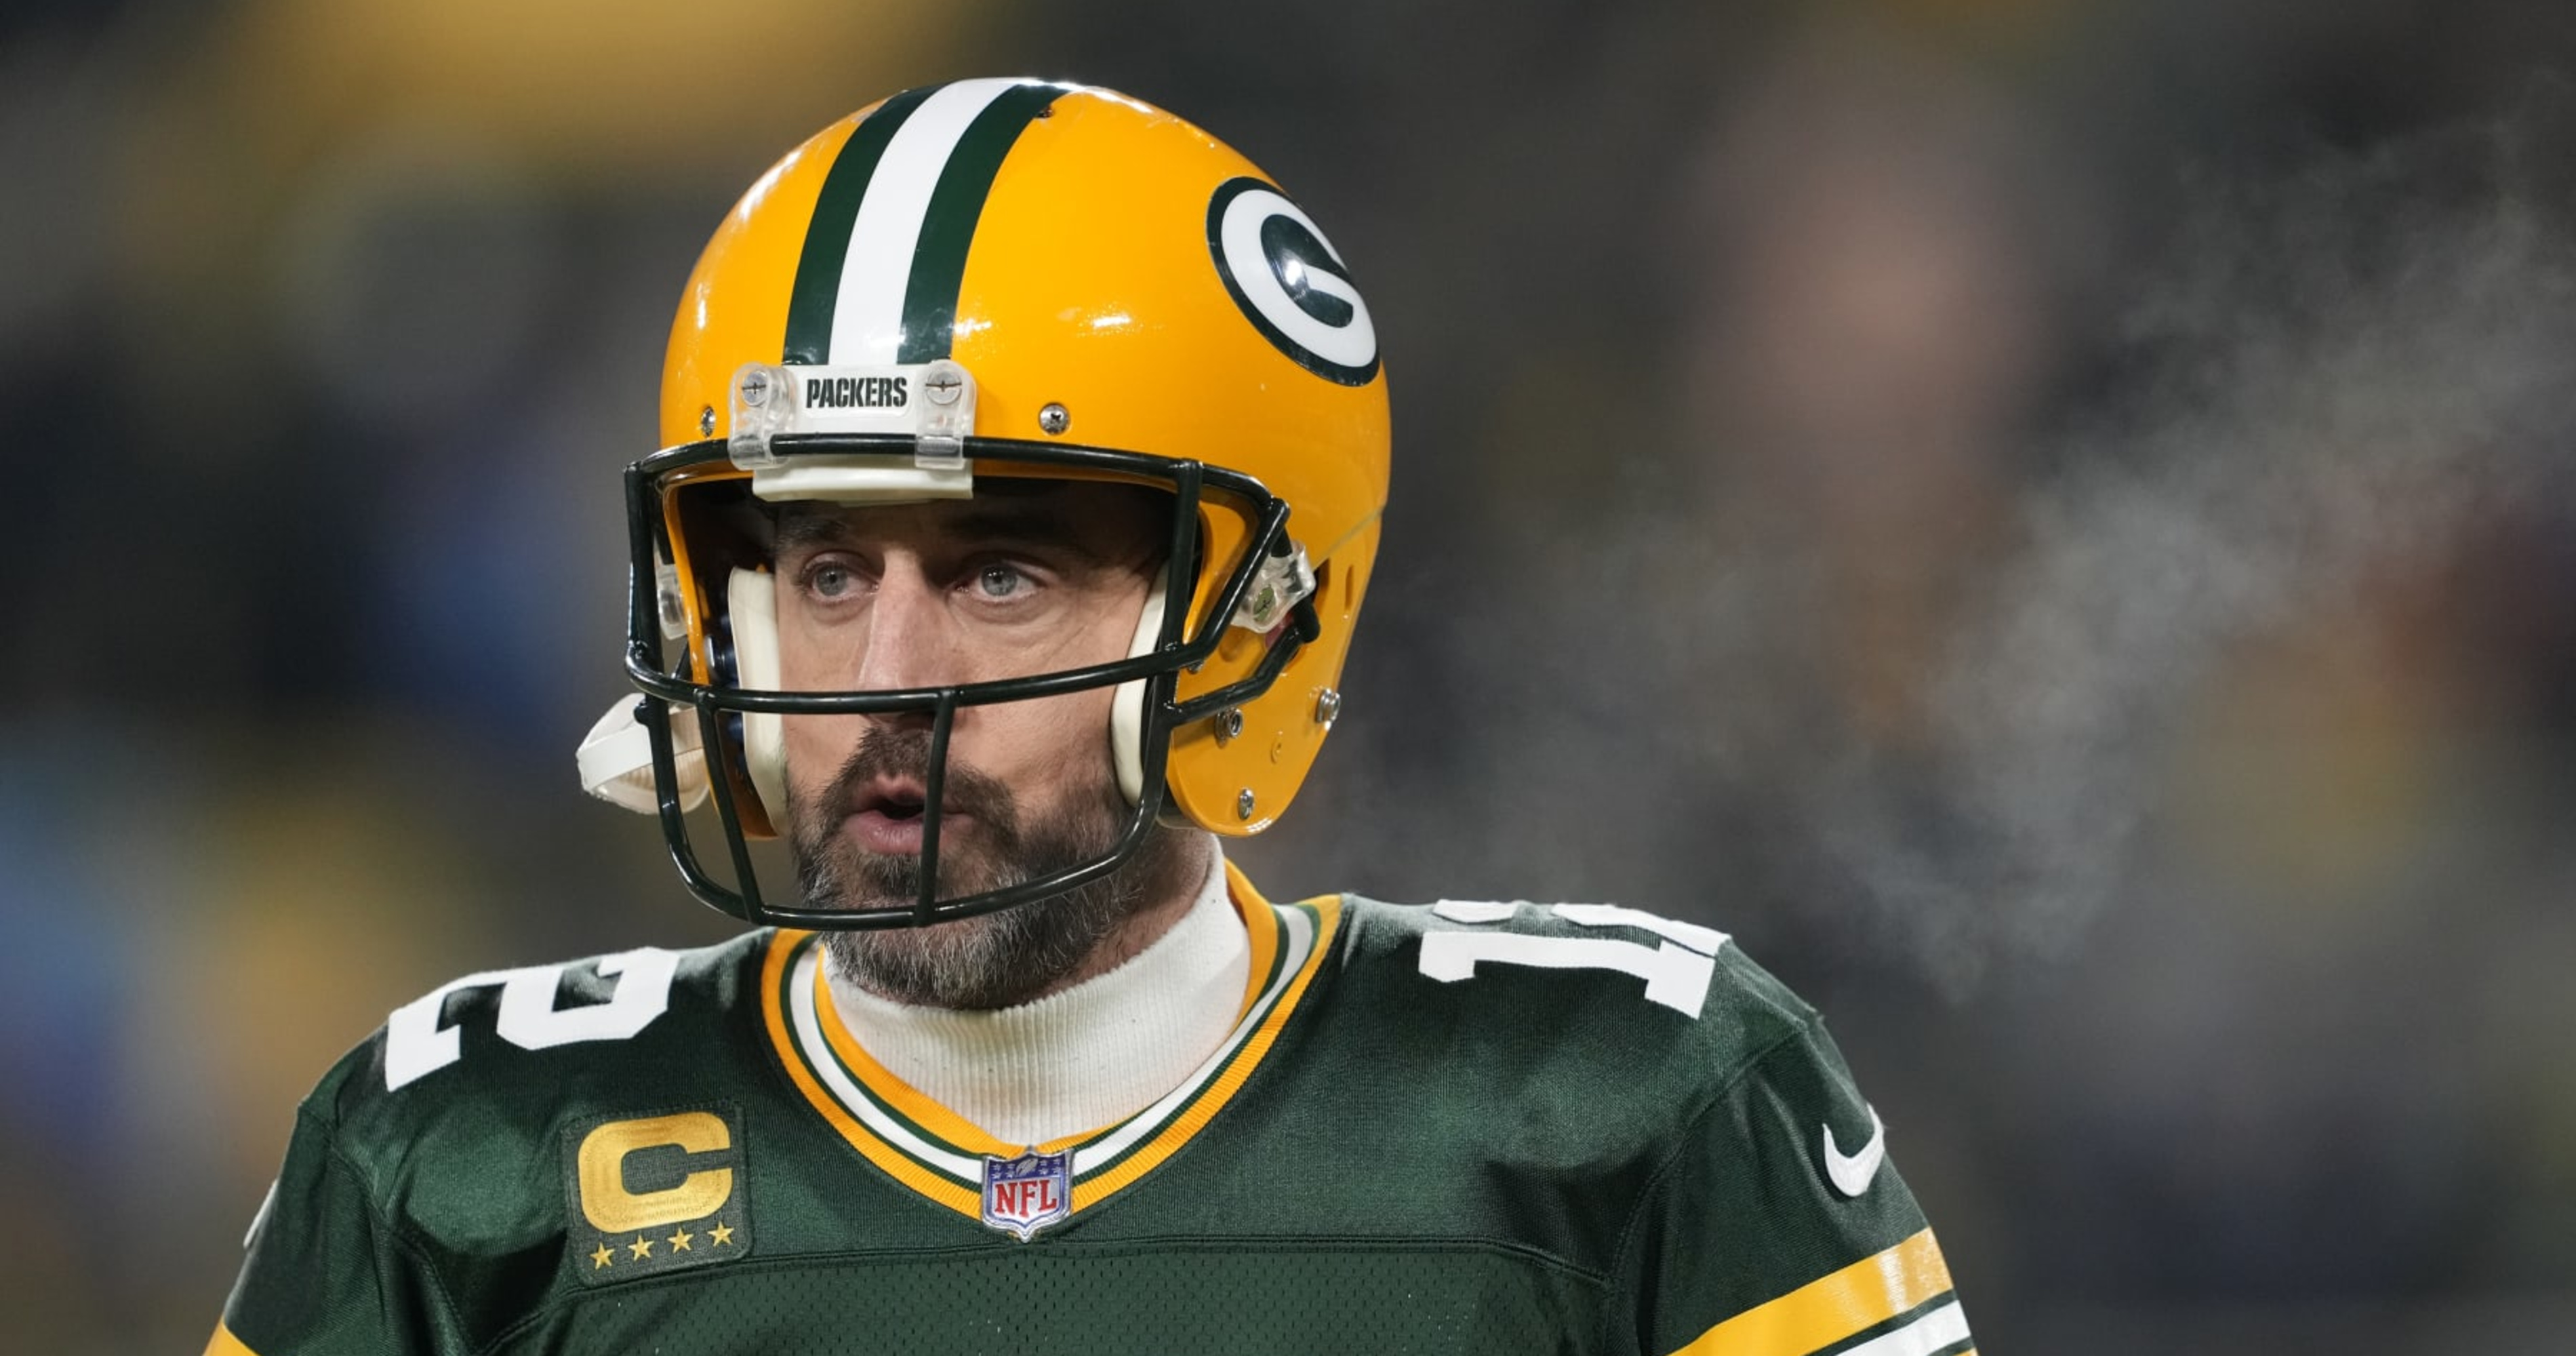 SportsCenter on X: The Green Bay Packers have been eliminated